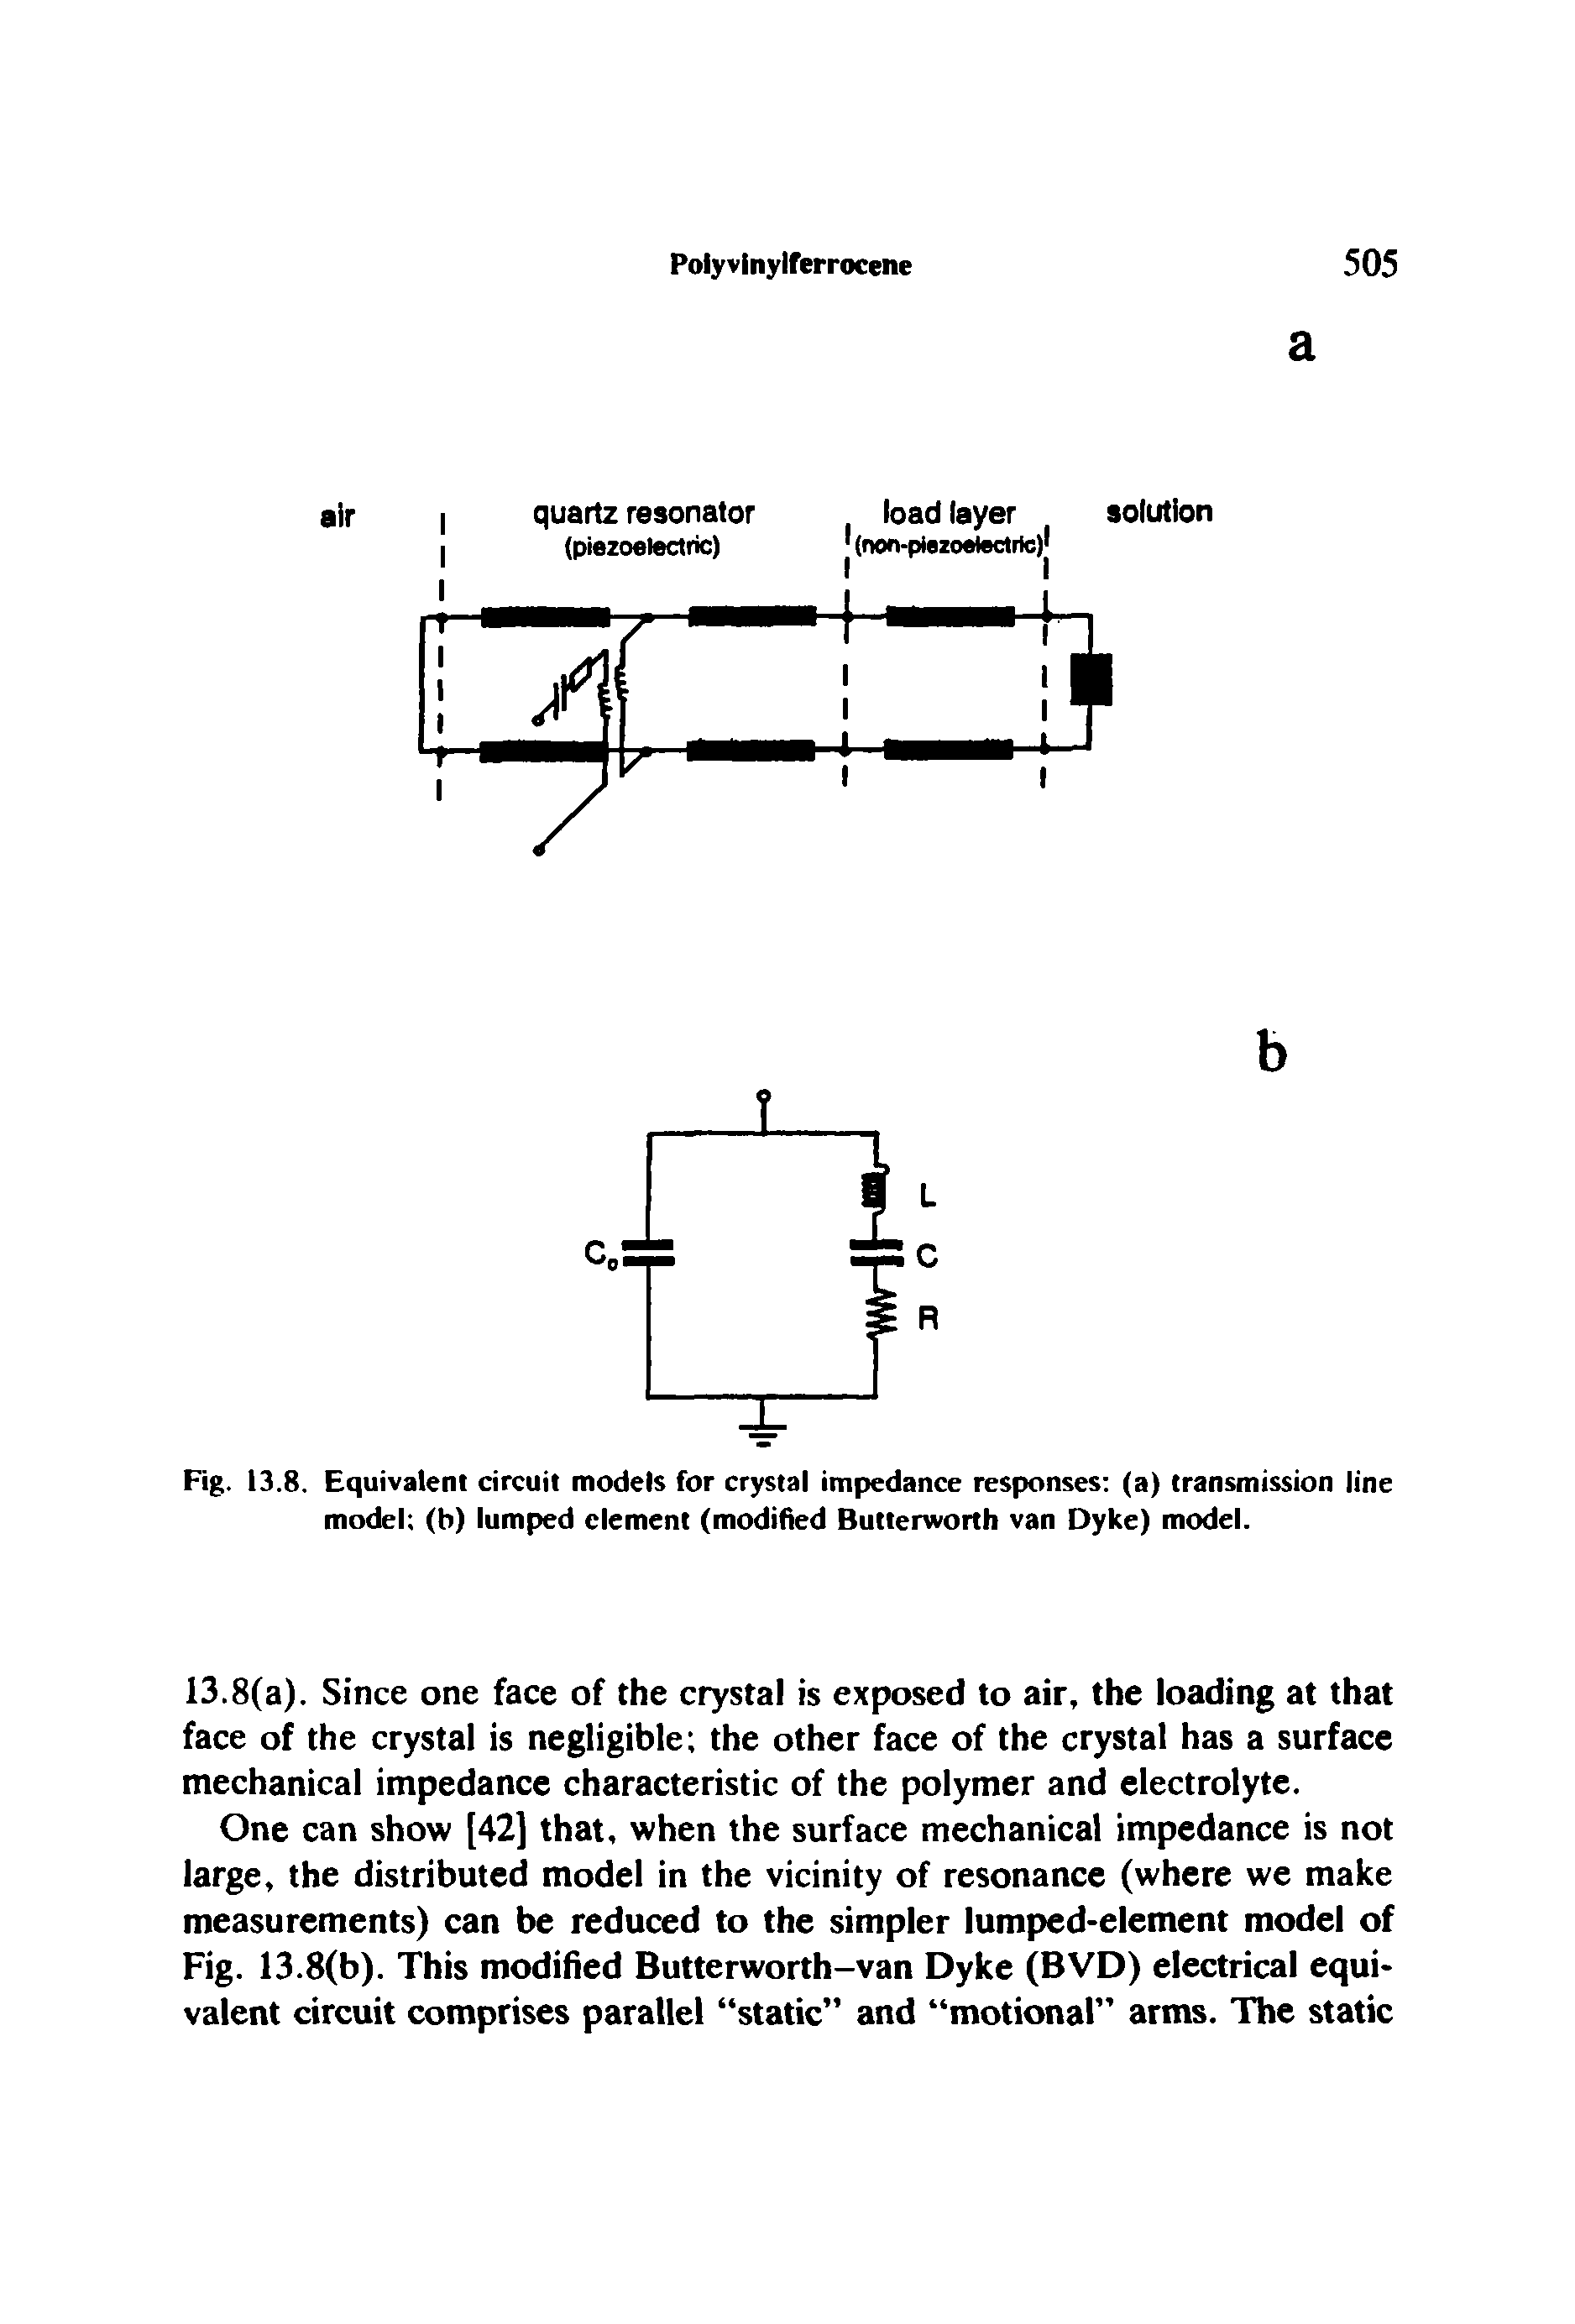 Fig. 13.8. Equivalent circuit models for crystal impedance responses (a) transmission line model (b) lumped clement (modified Butterworth van Dyke) model.